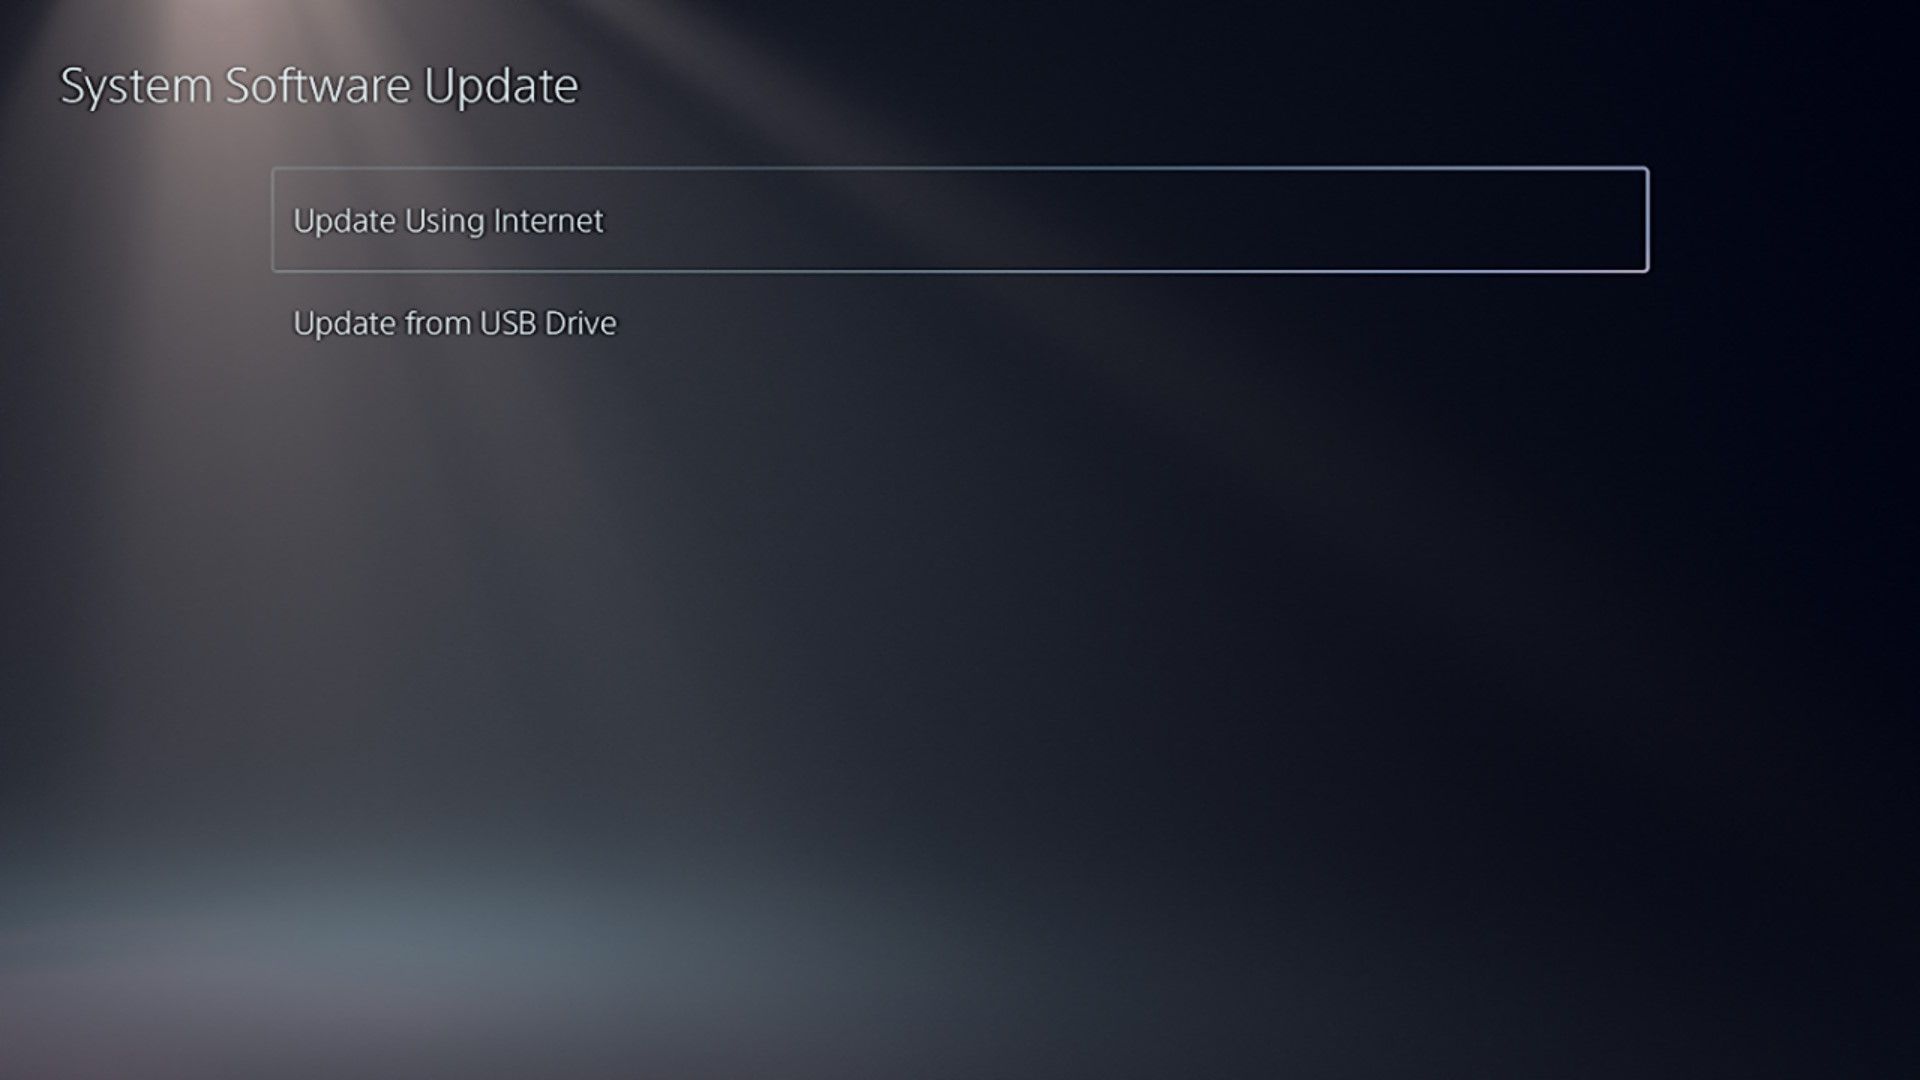 The System Software Update screen on PS5 with options to update either using internet or USB drive.